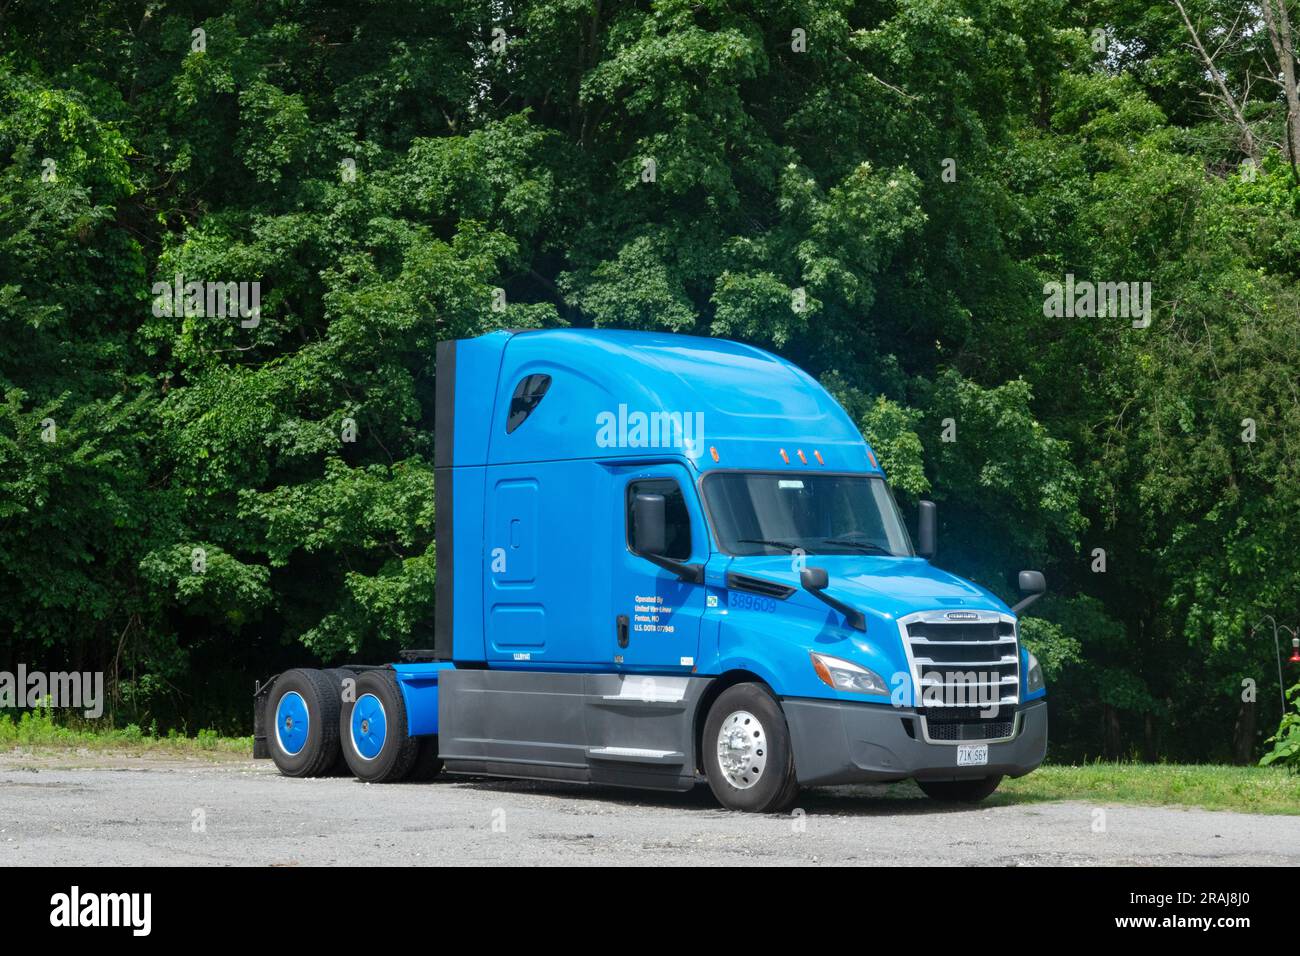 URBAN LANDSCAPE The tractor unit of a tractor trailer. In Brewster, Westchester, New York. Stock Photo